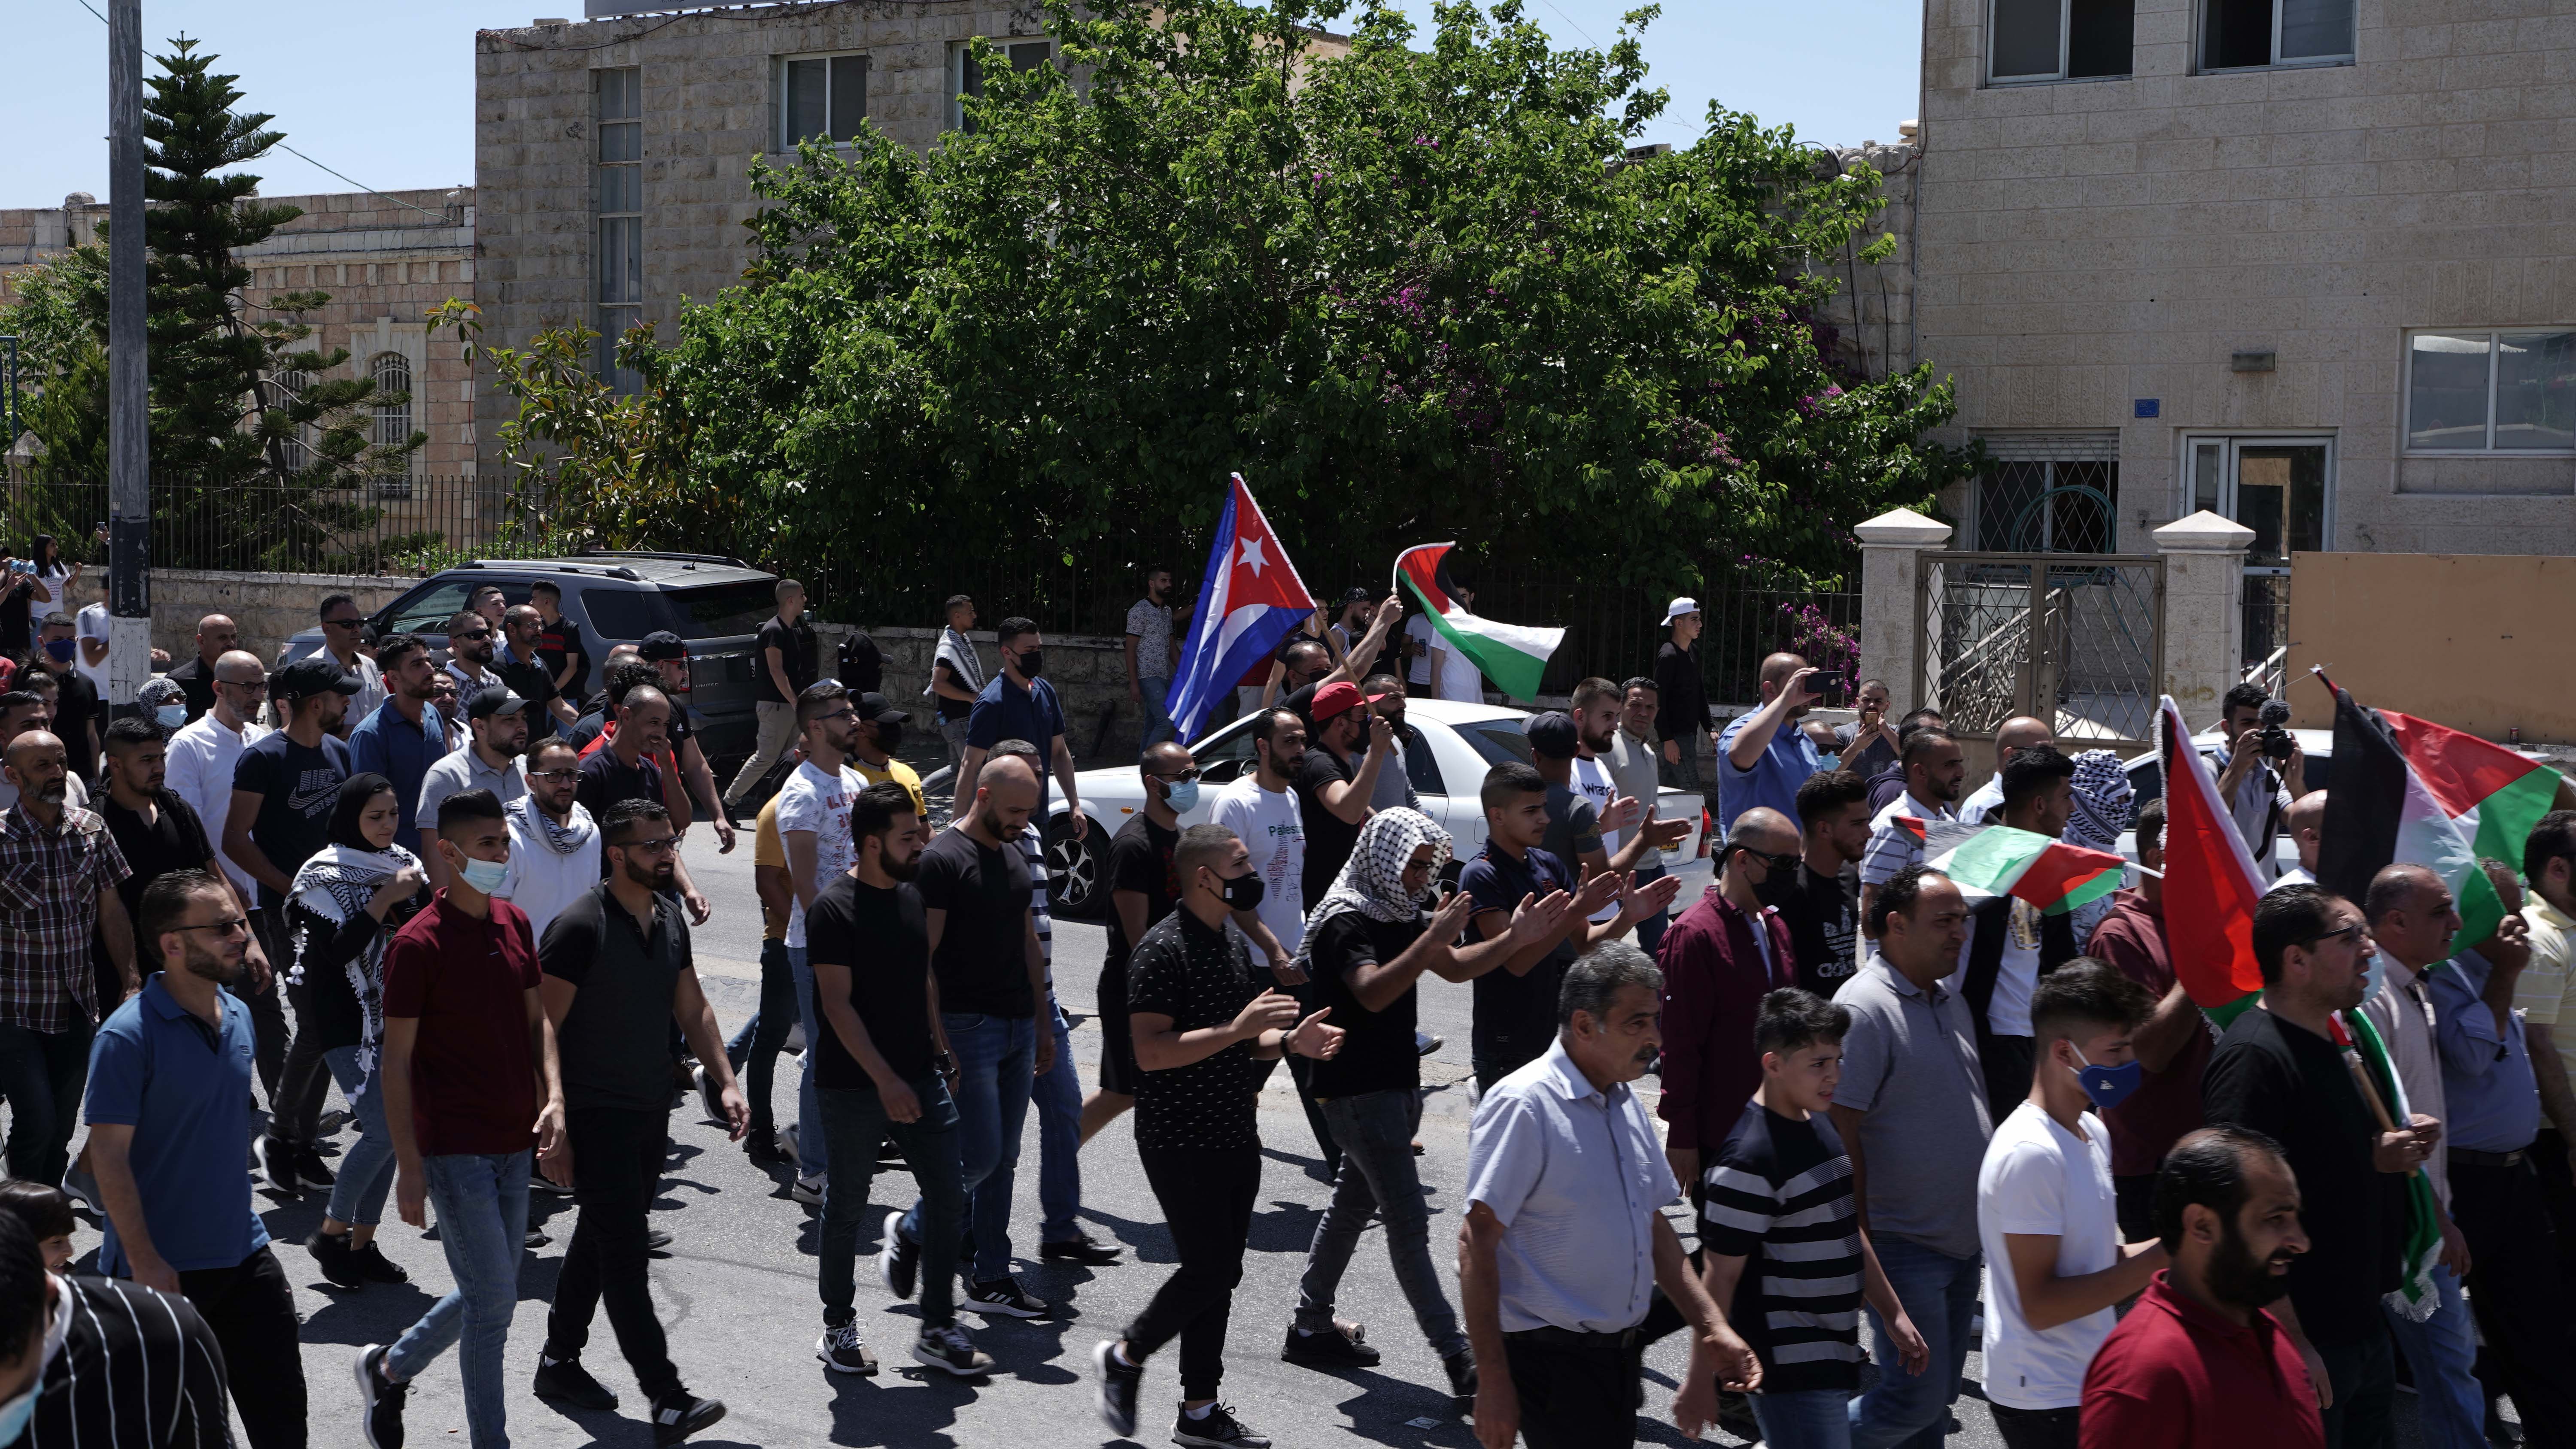 Palestinians gather to protest in the city of Bethlehem